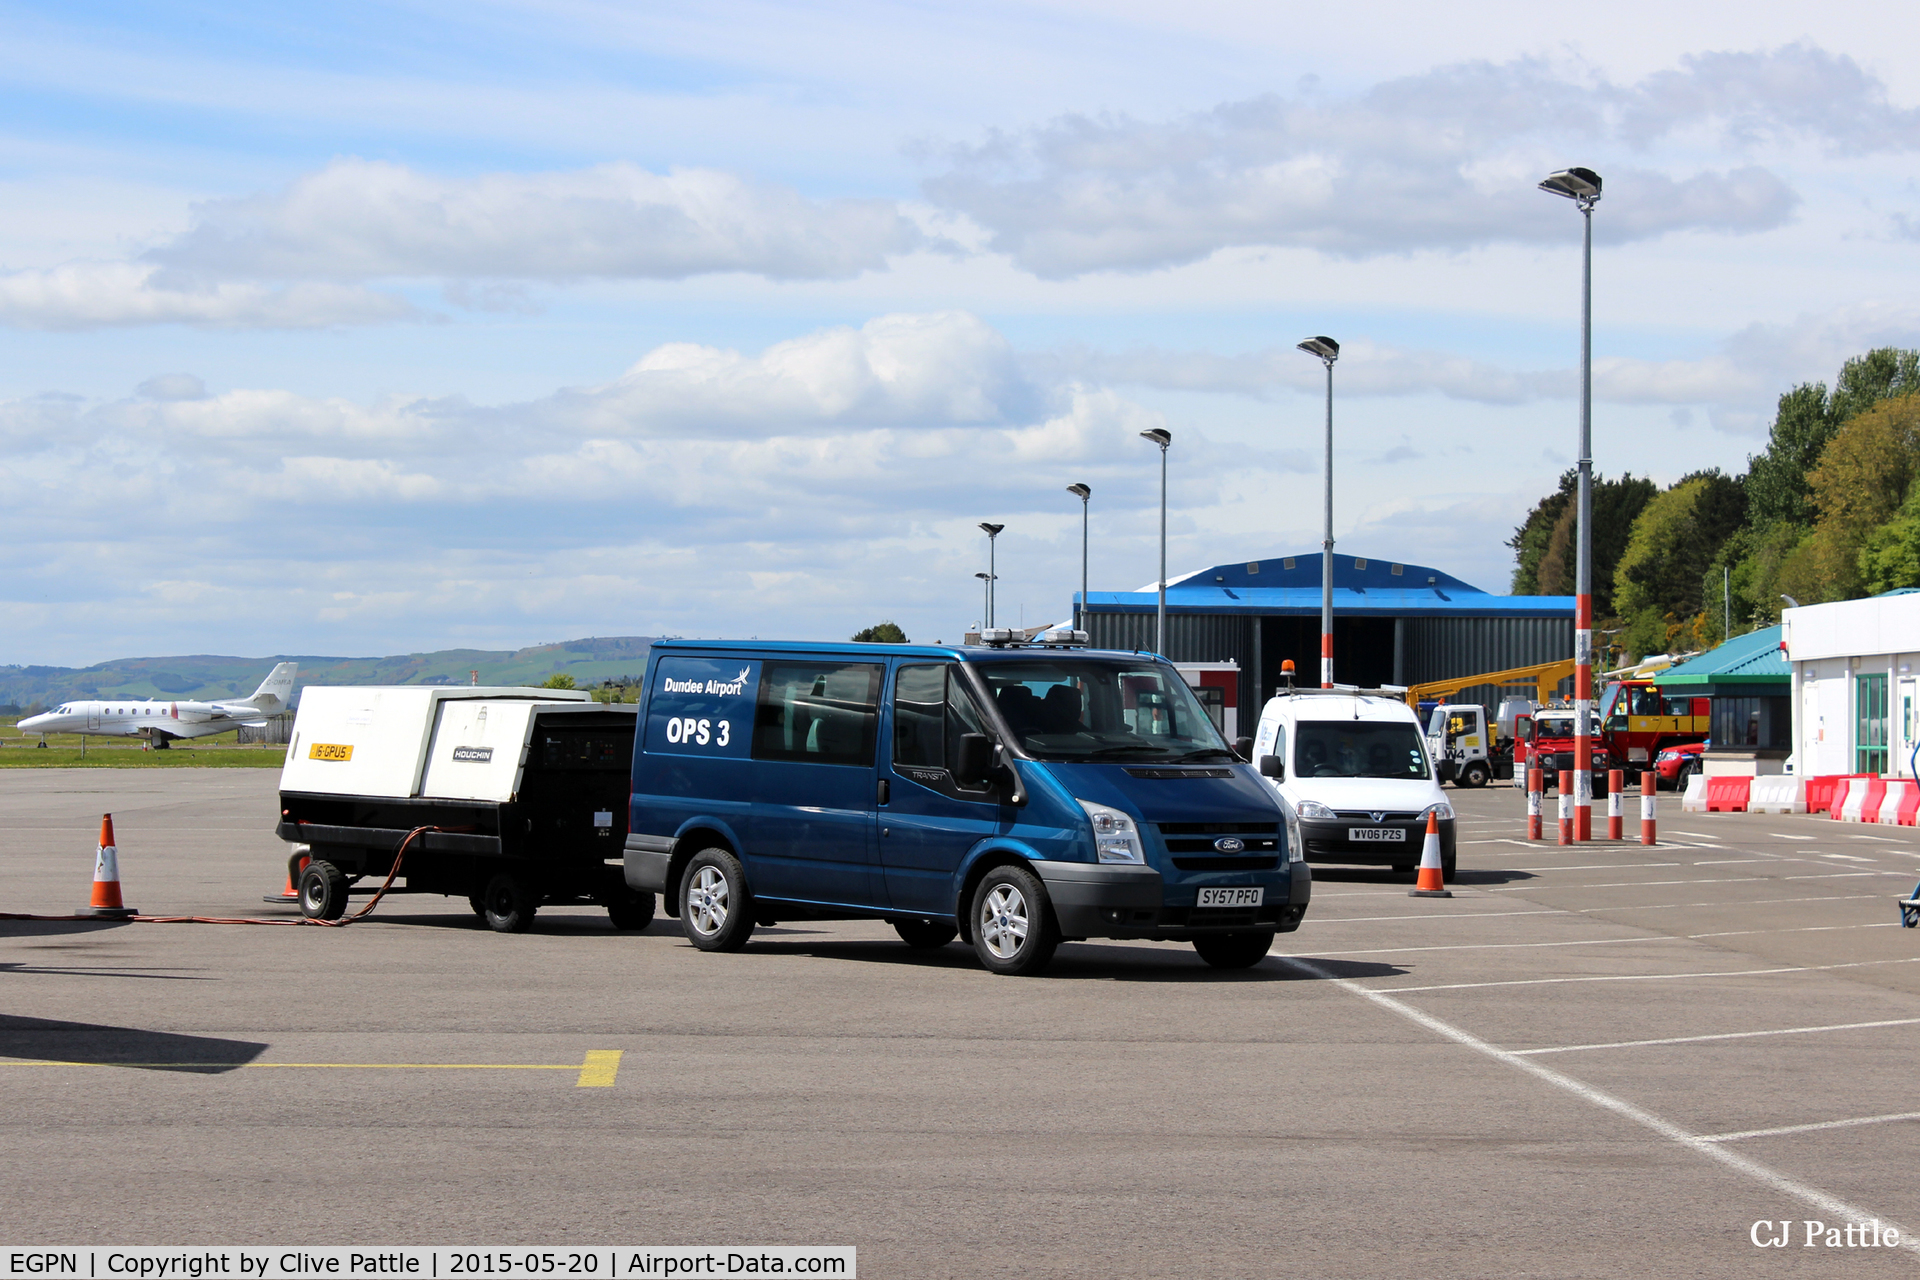 Dundee Airport, Dundee, Scotland United Kingdom (EGPN) - Operations vehicles on the ramp at Dundee Riverside airport (EGPN)